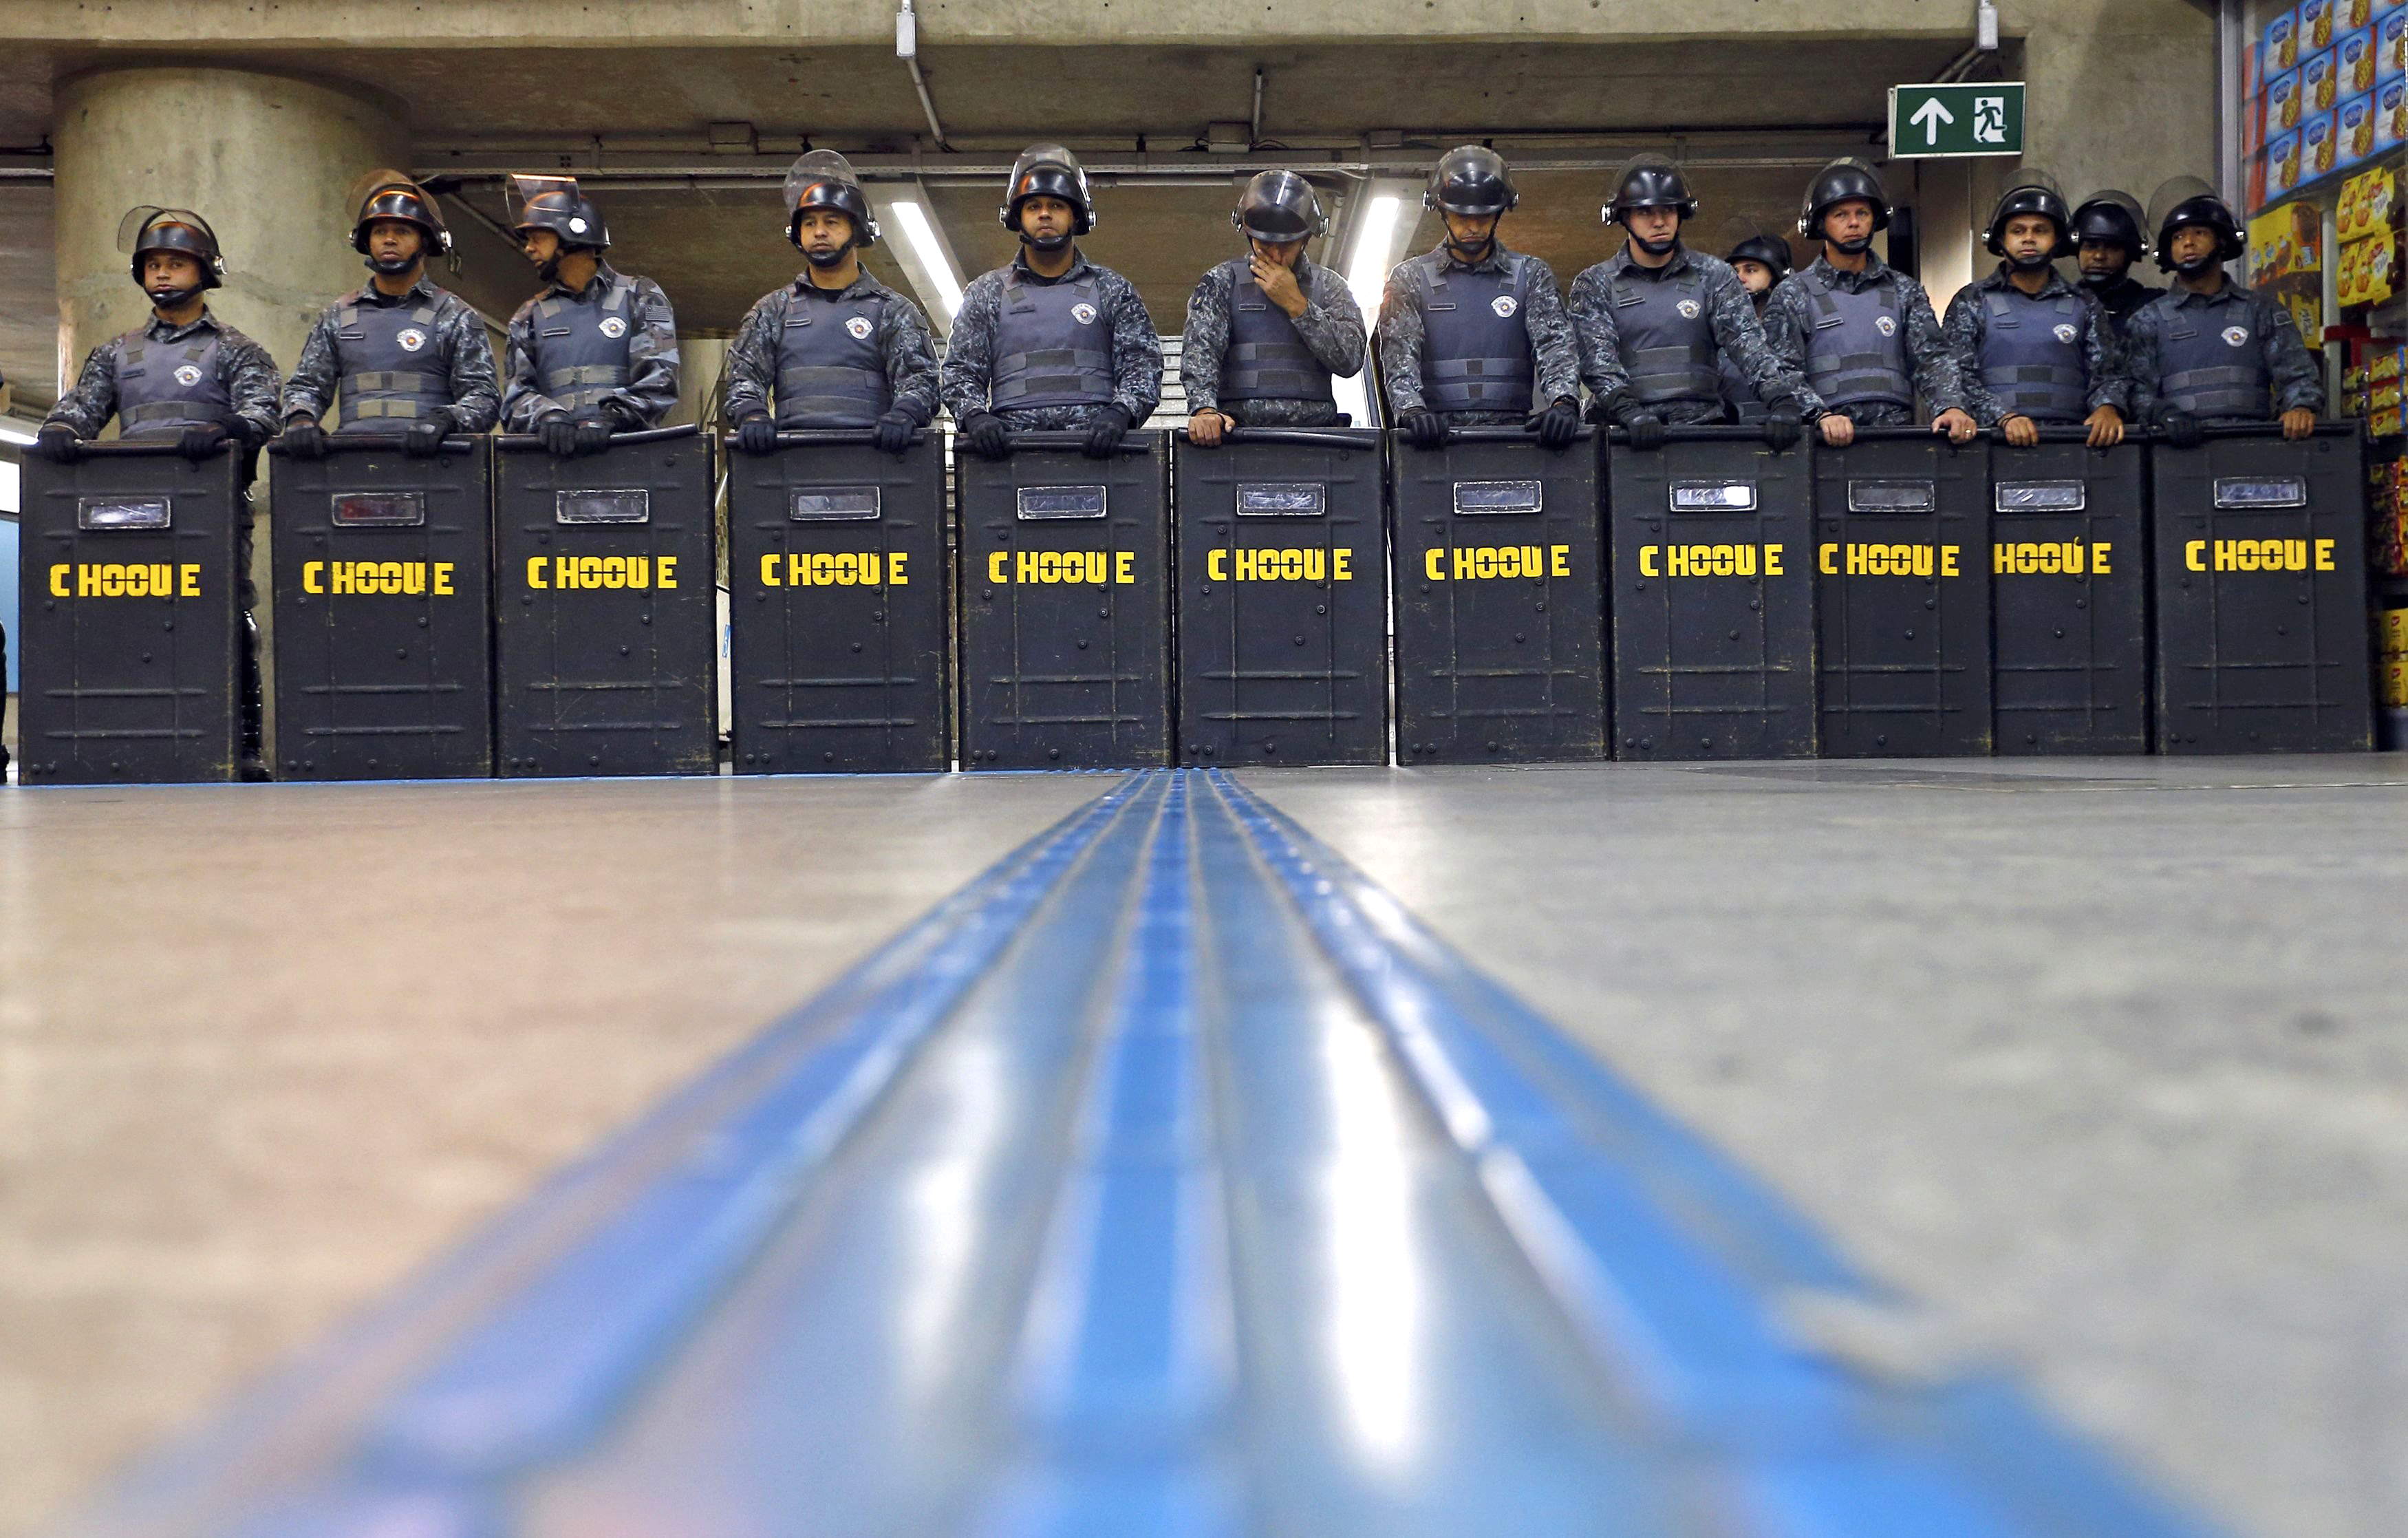 Policemen in riot gear stand inside Ana Rosa subway station during the fifth day of metro worker's protest in Sao Paulo on June 9, 2014. (Kai Pfaffenbach—Reuters)